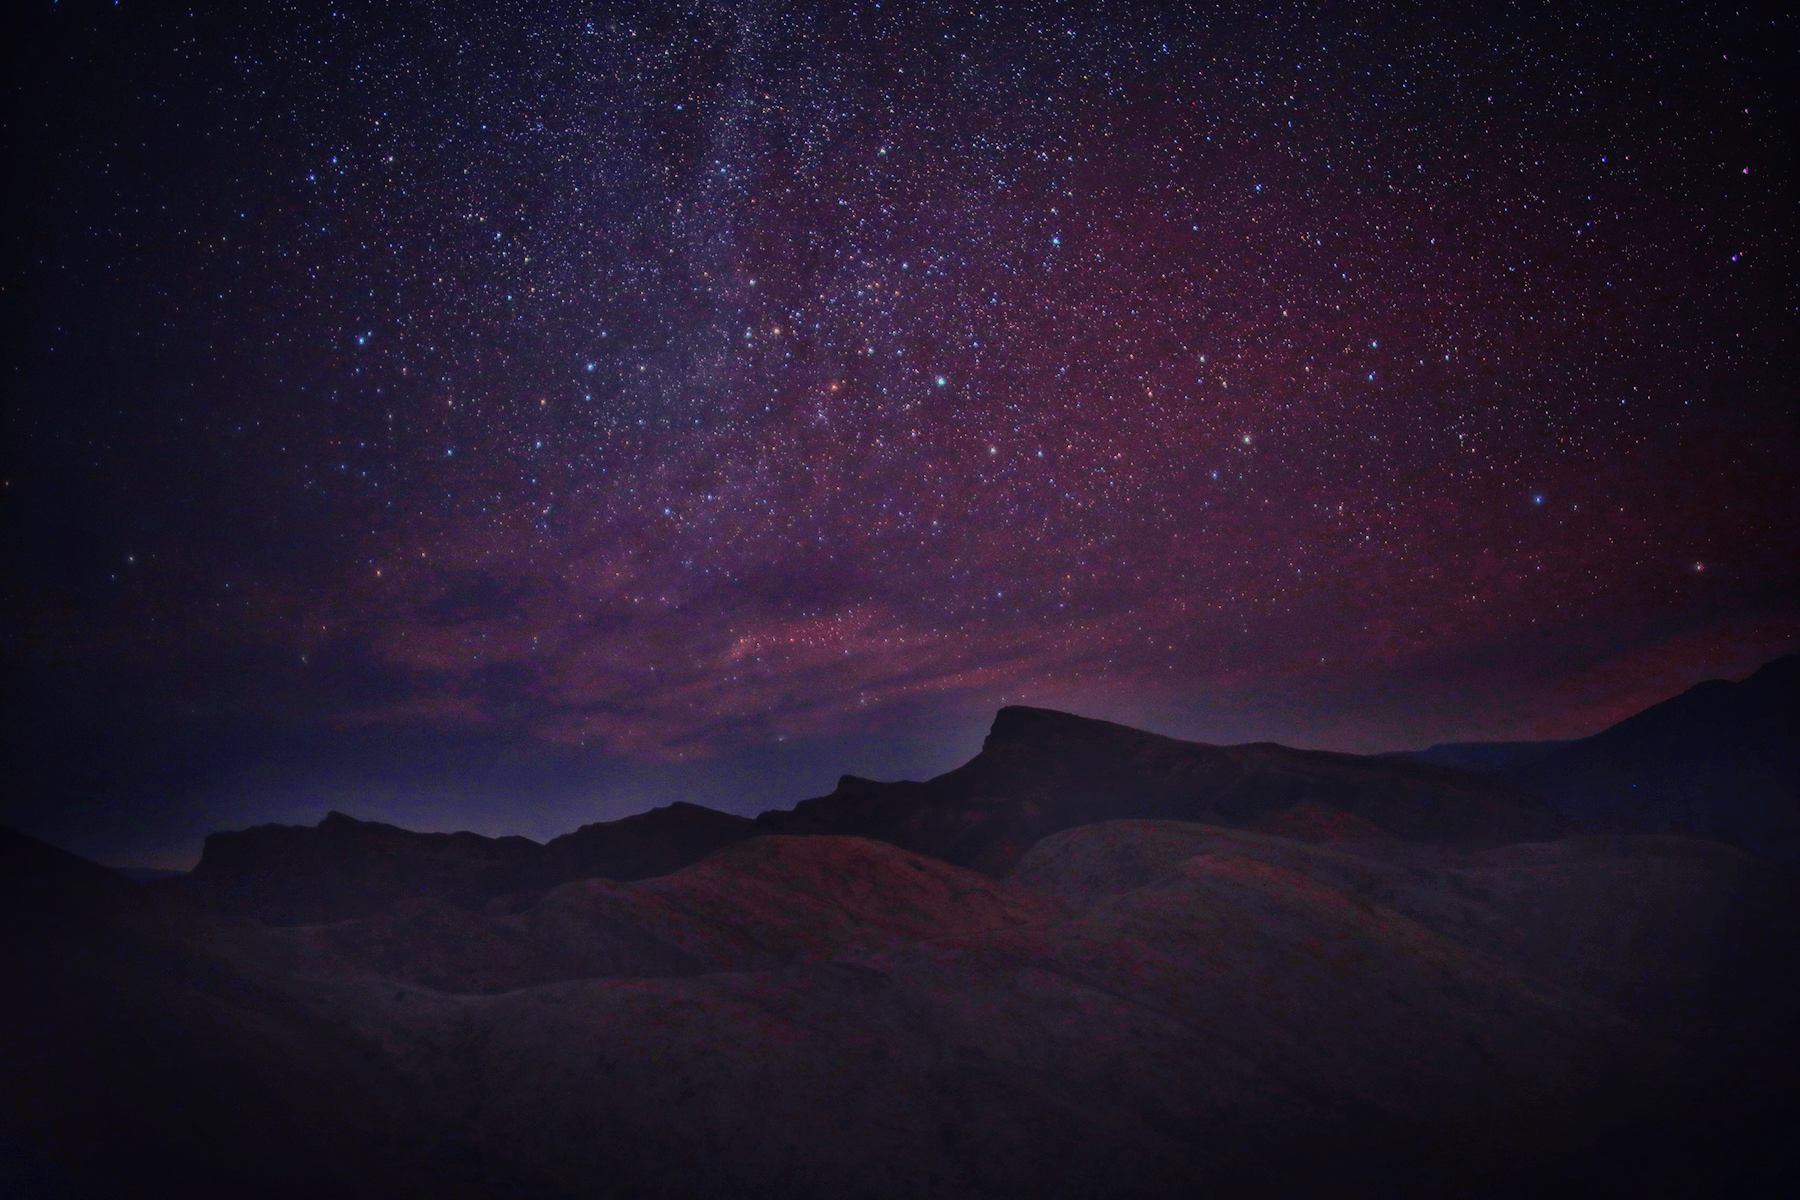 Night photography and star gazing in Death Valley